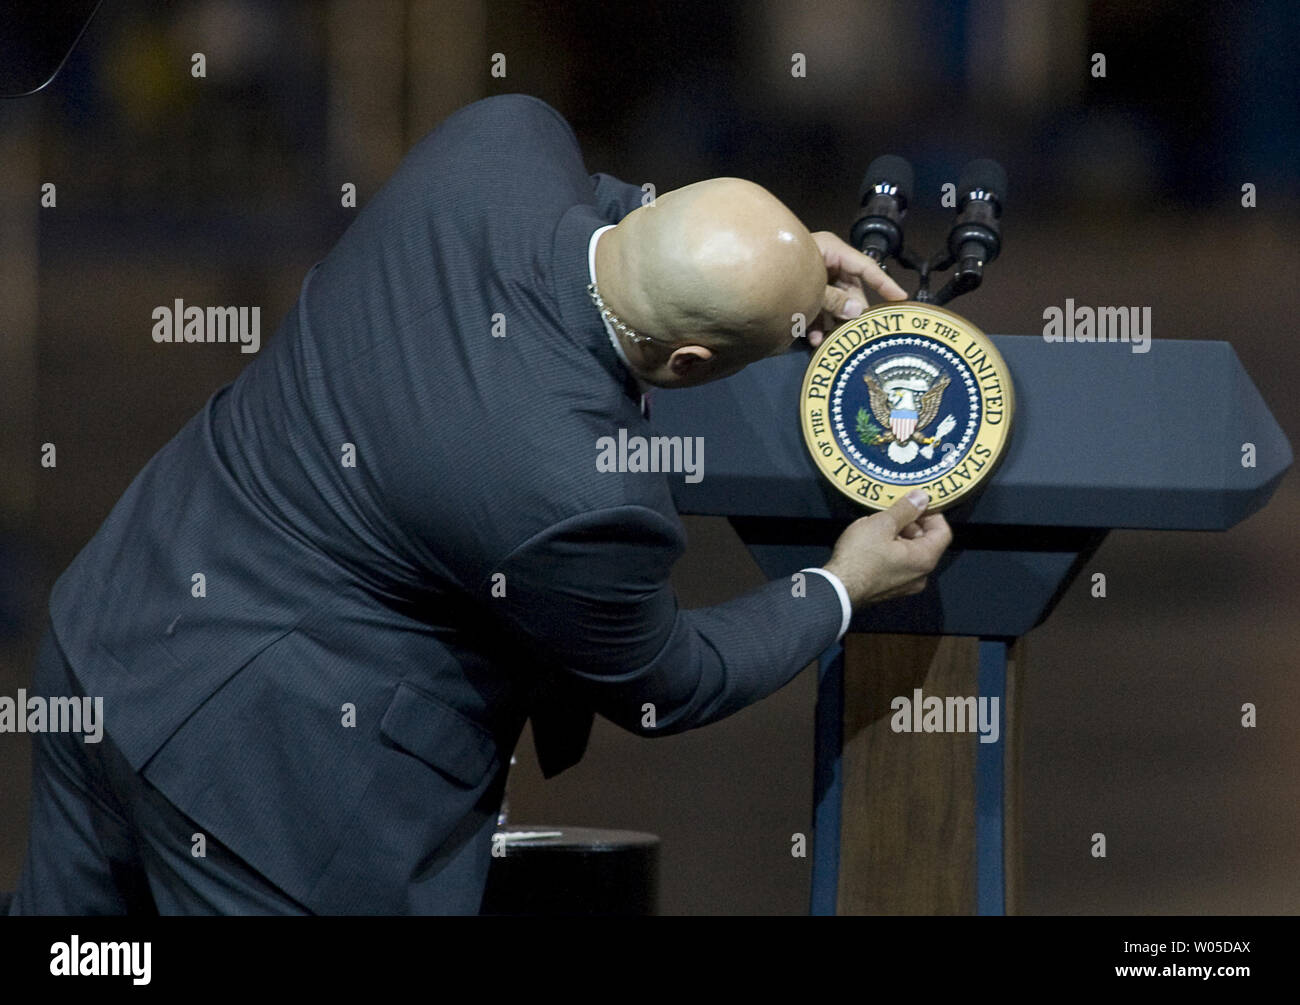 A Secret Service agent attaches the Presidential Seal to a podium before President Barack Obama speak to Boeing employees about his blueprint for an economy built to last, based on American domestic manufacturing and promoting American exports,  at the aerospace giant's assembly facility in Everett, Washington on February 17, 2012. Later Obama will be attending two fund raising events for his re-election campaign.   UPI/Jim Bryant Stock Photo